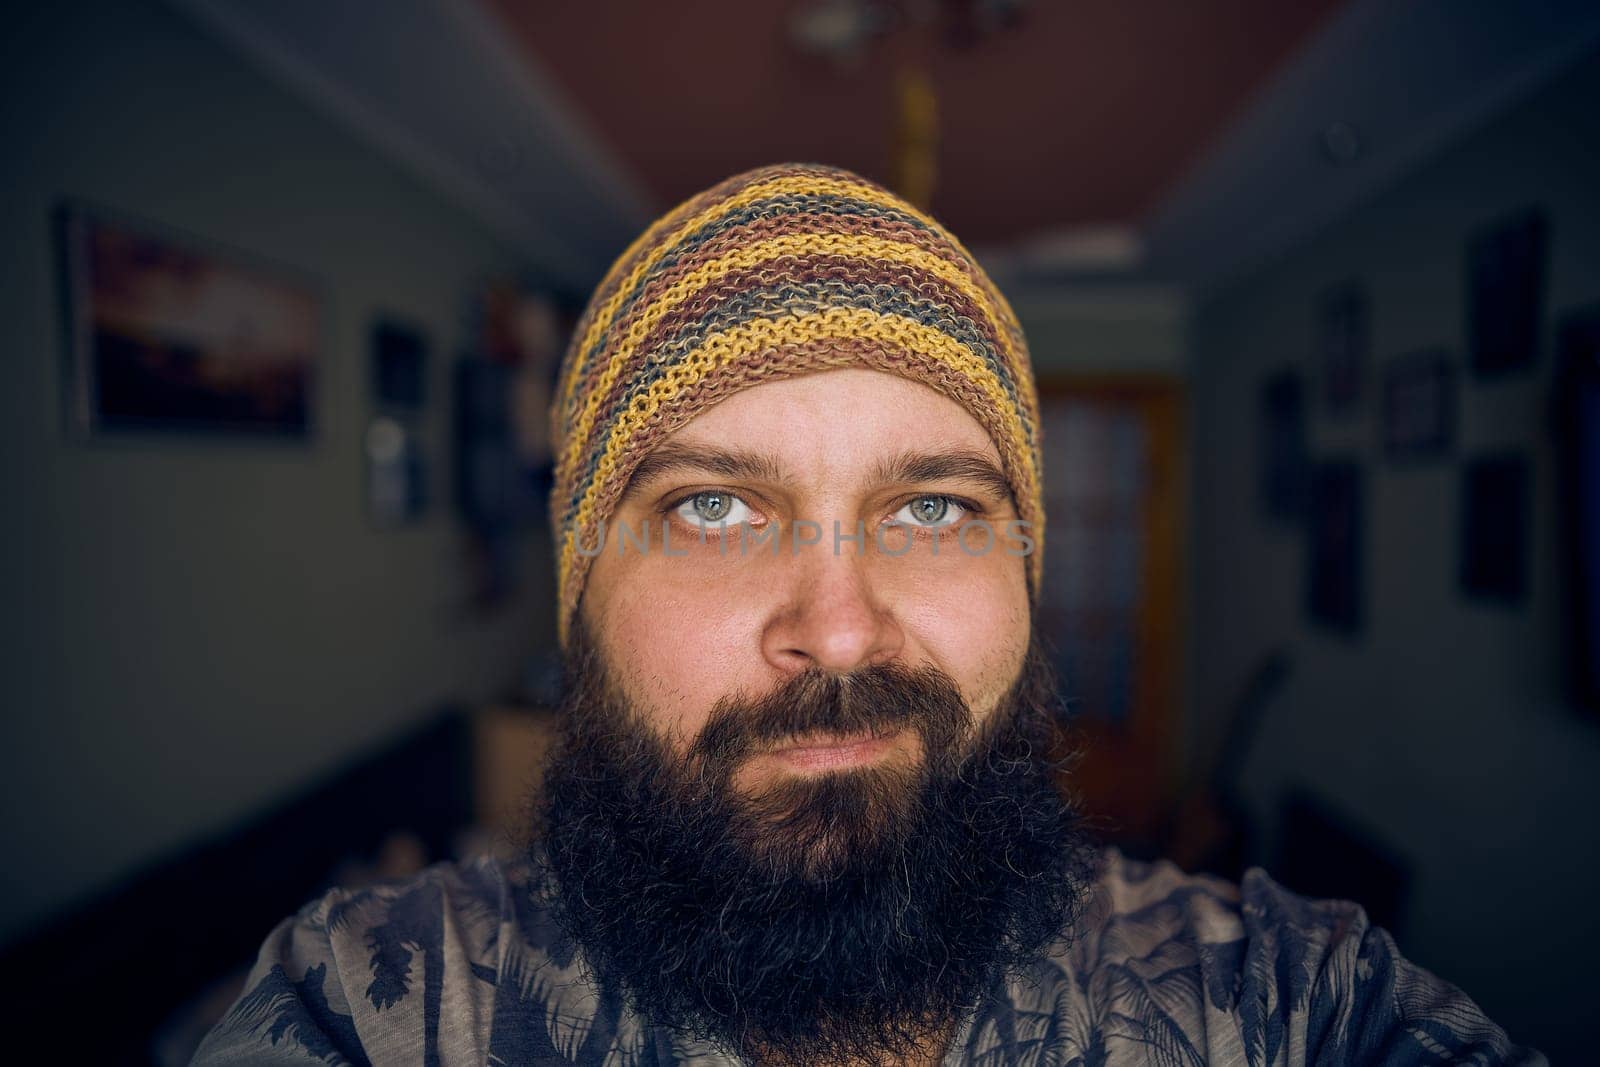 A man with a beard wearing a striped hat and shirt, looking up into the camera